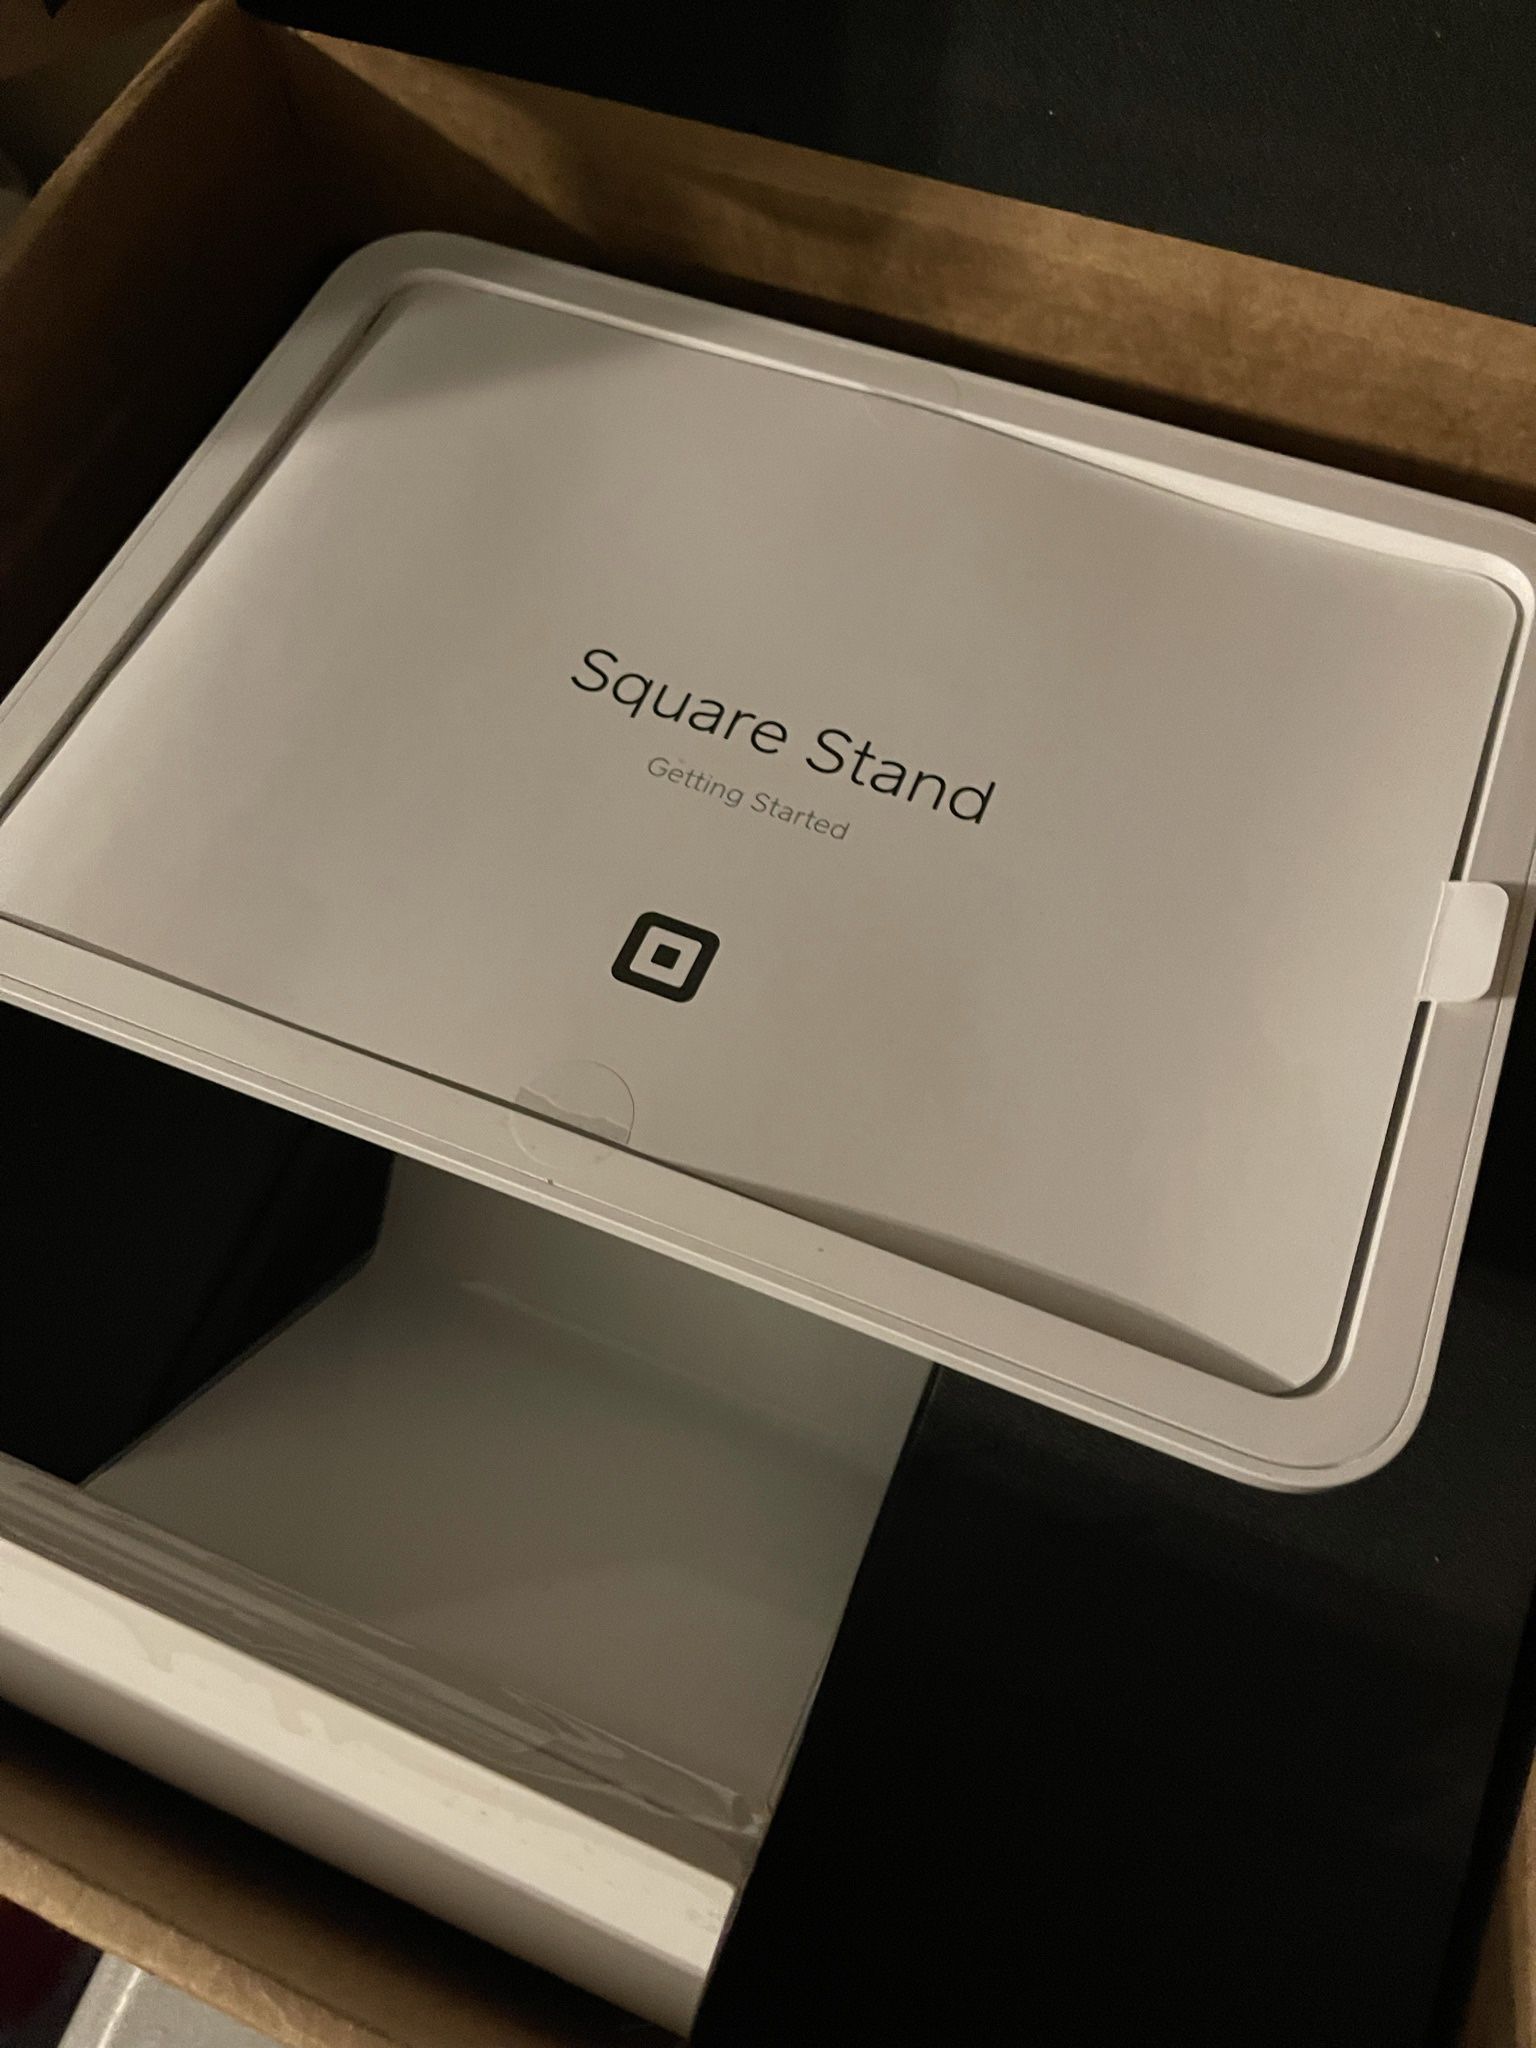 NEW Square Stand and Square Reader for Contactless and Chip